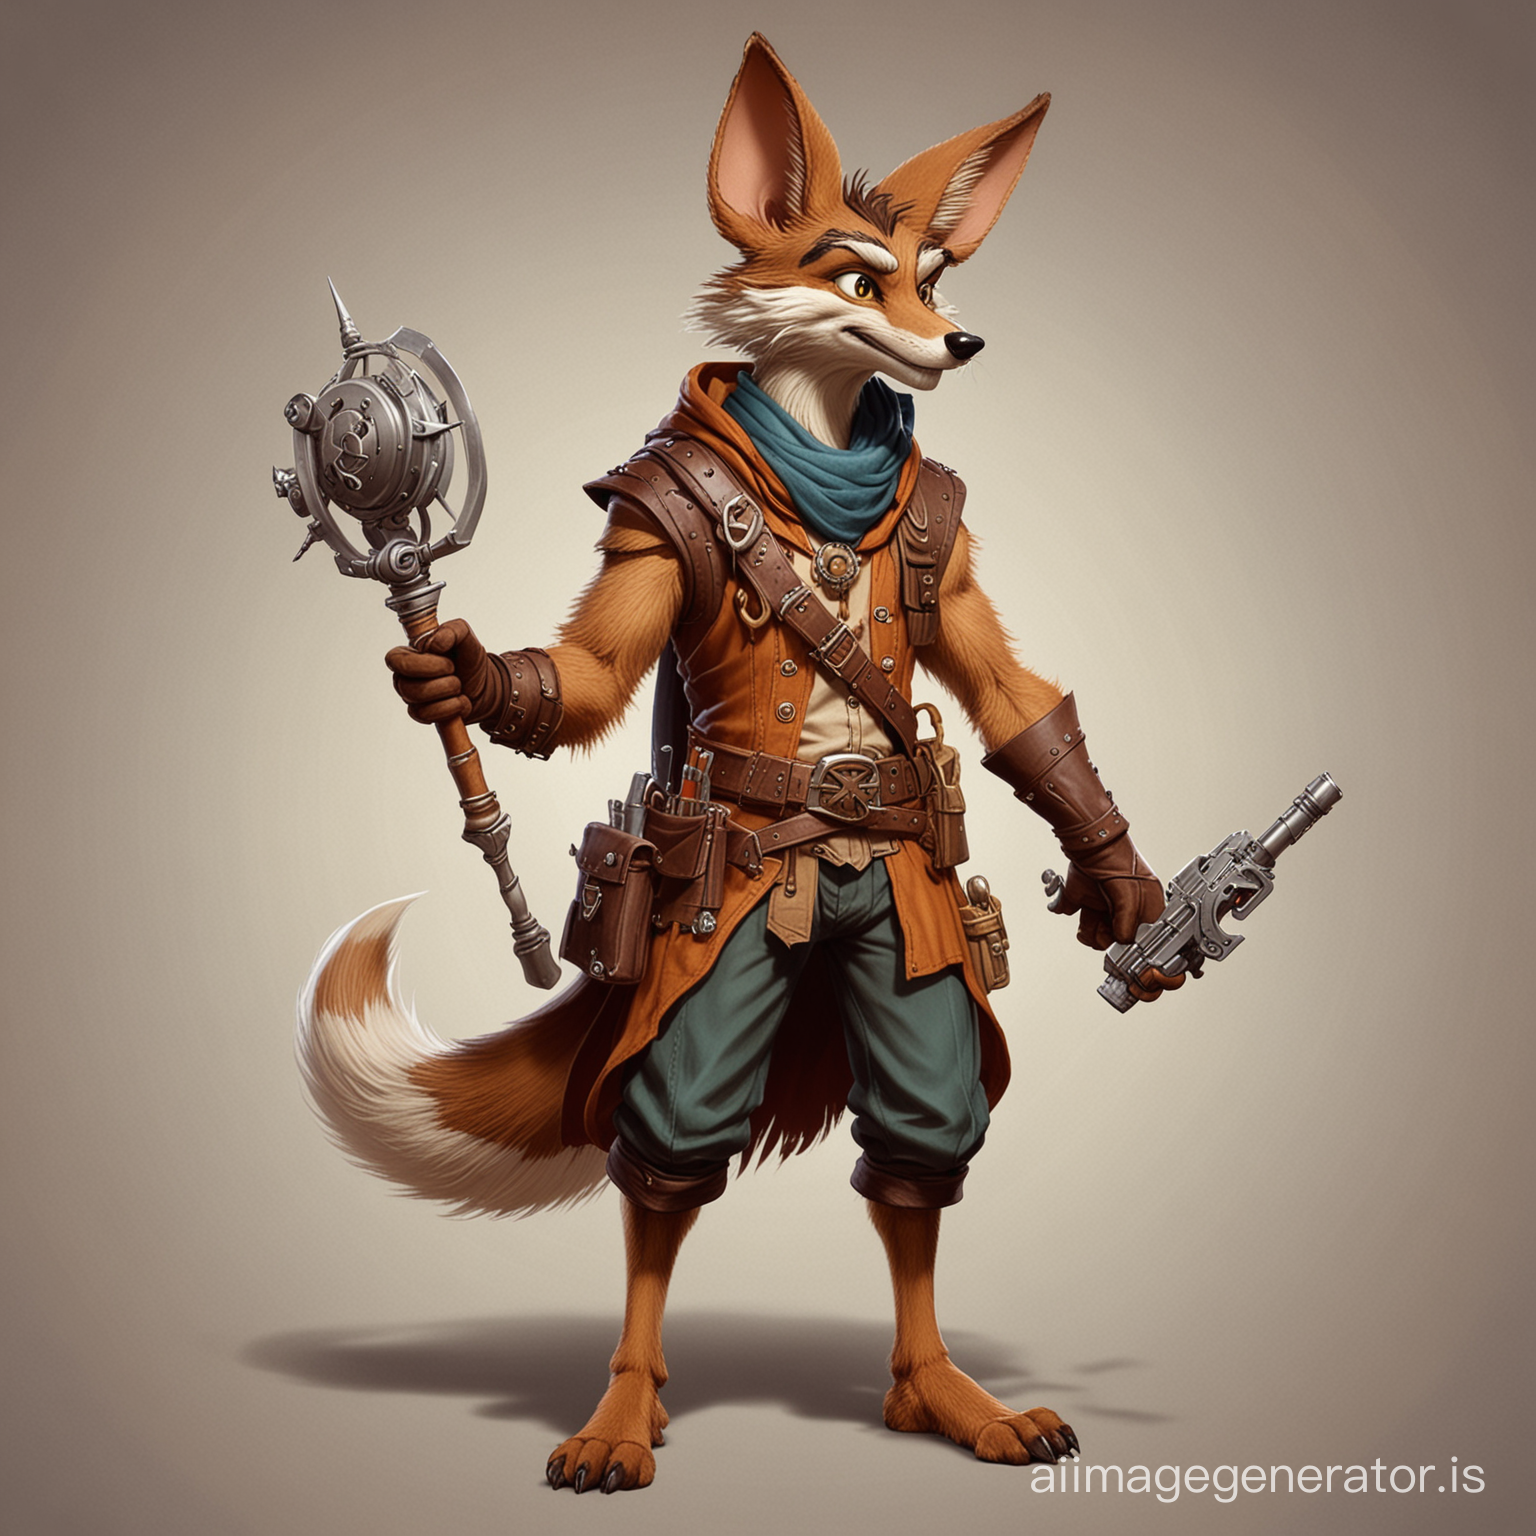 DnD fantasy style character of Wile E Coyote as an artificer
